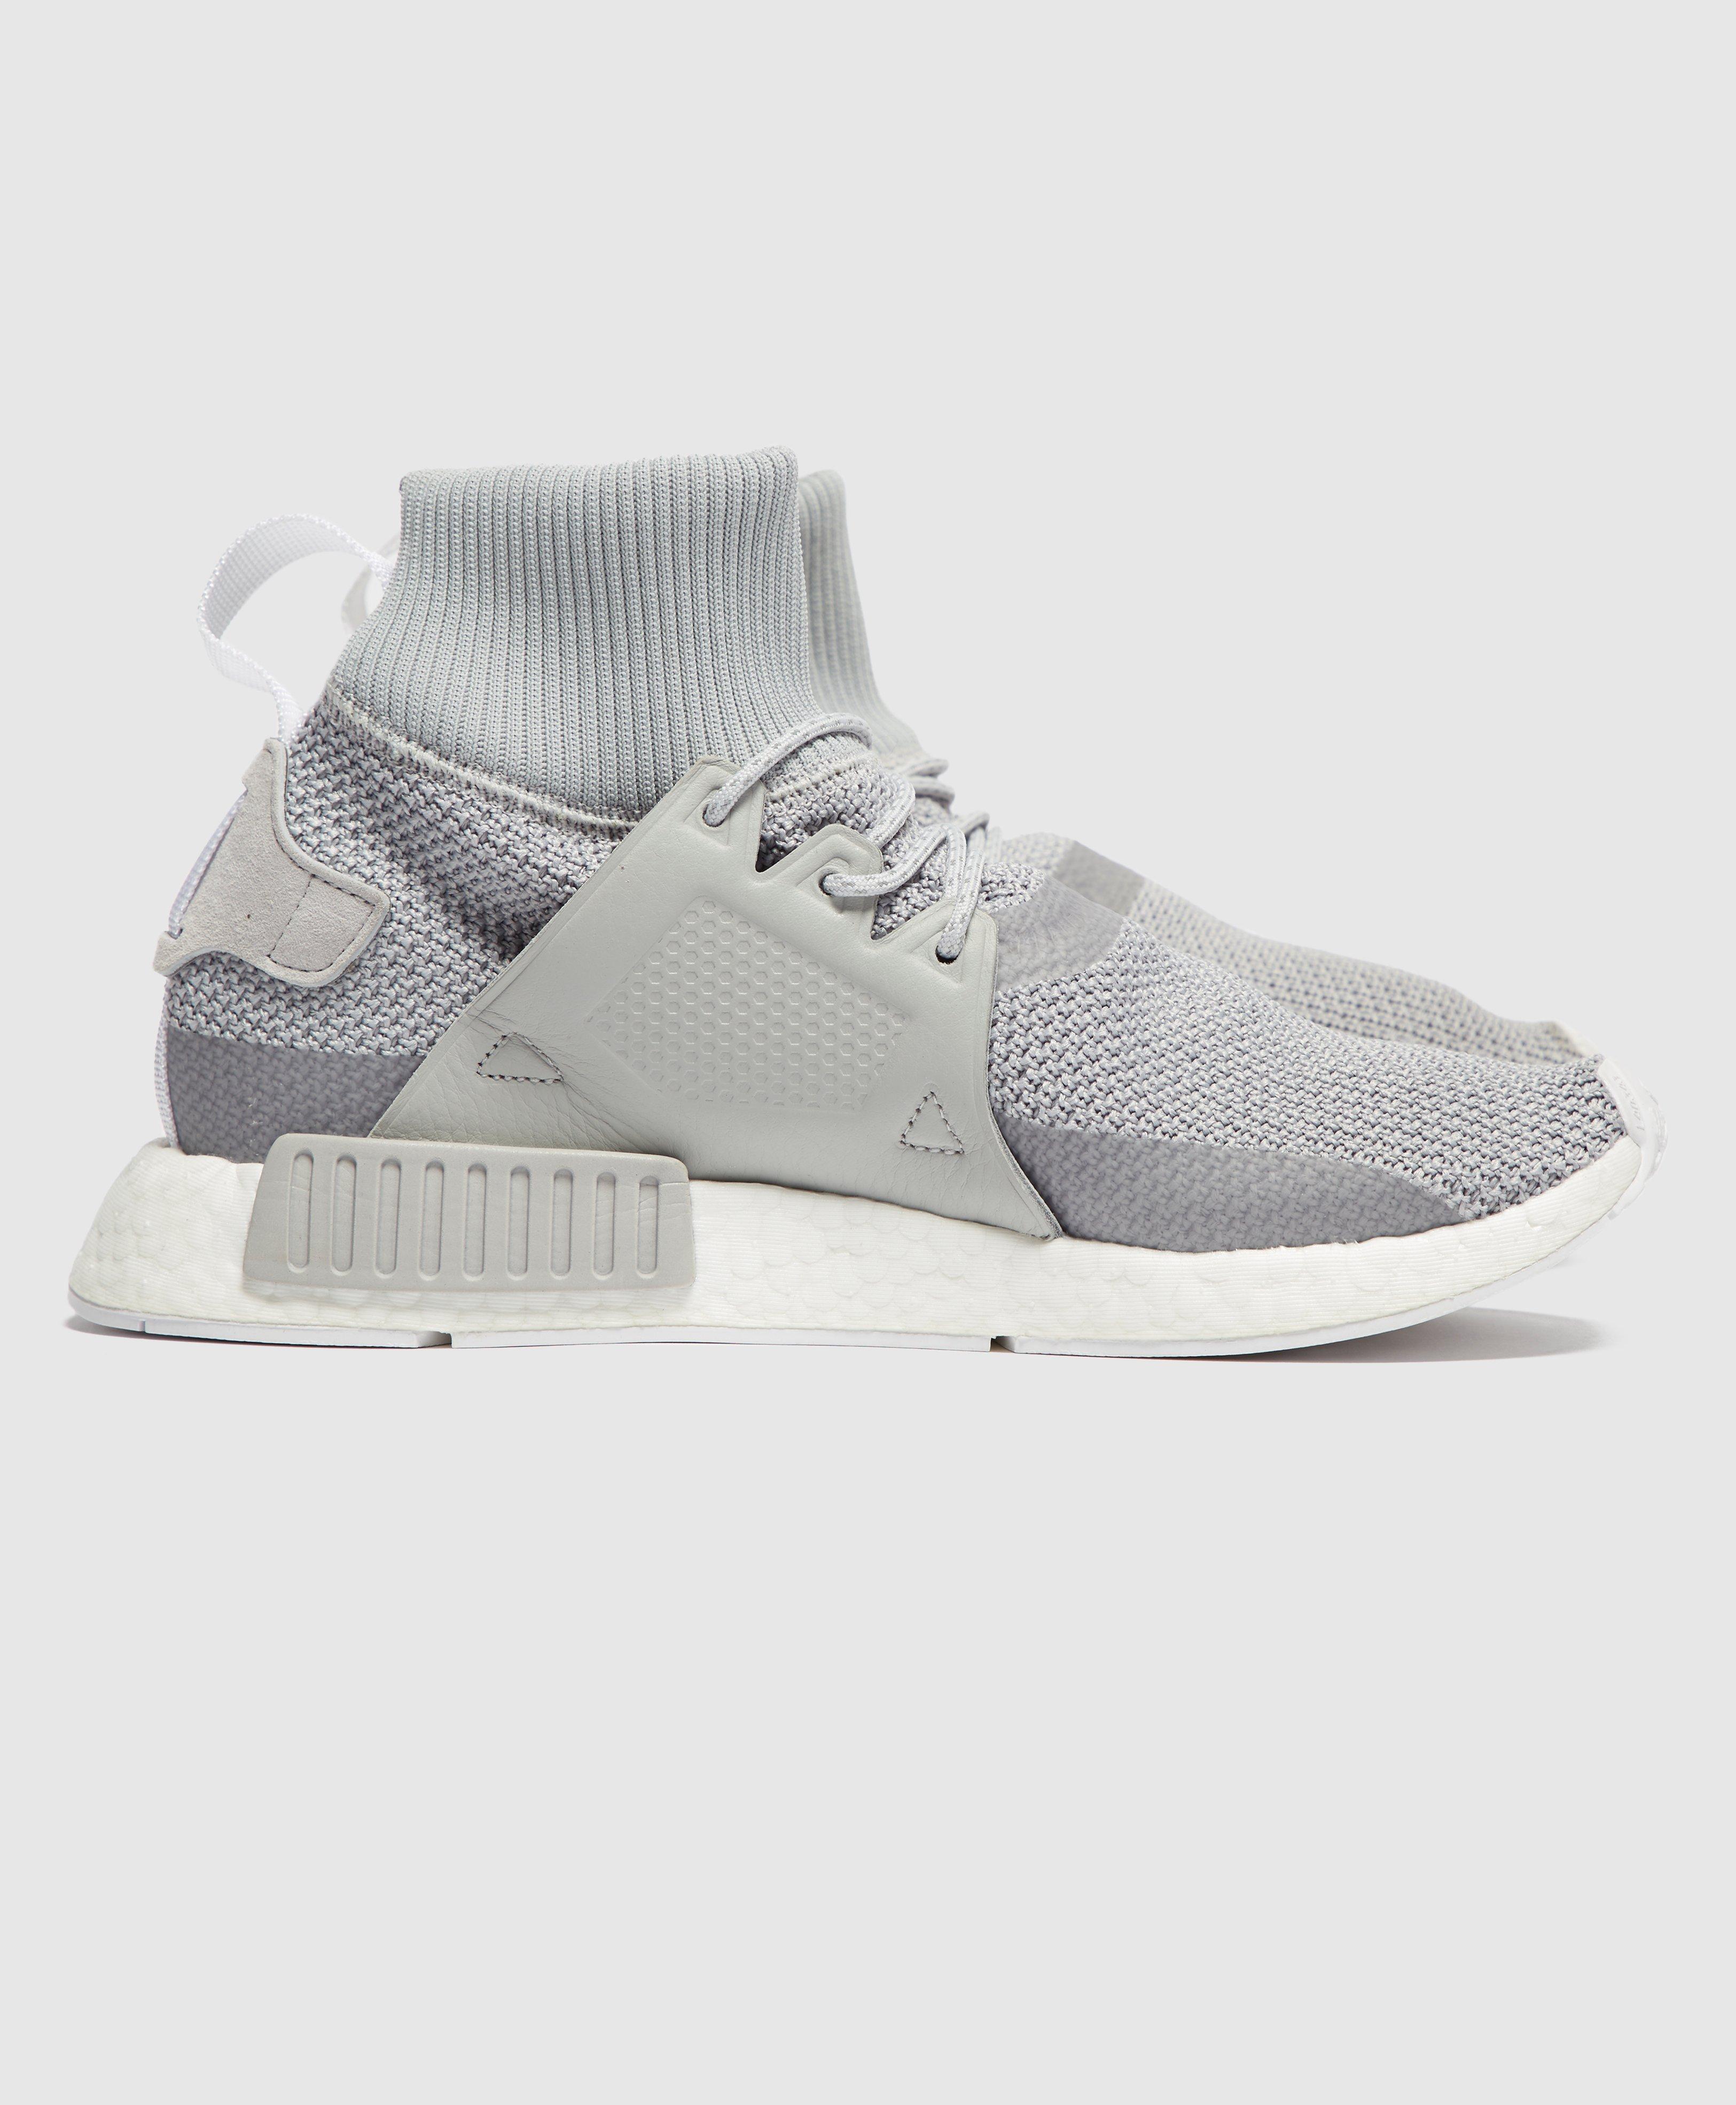 well wreapped Adidas NMD XR1 blue red white For Sale